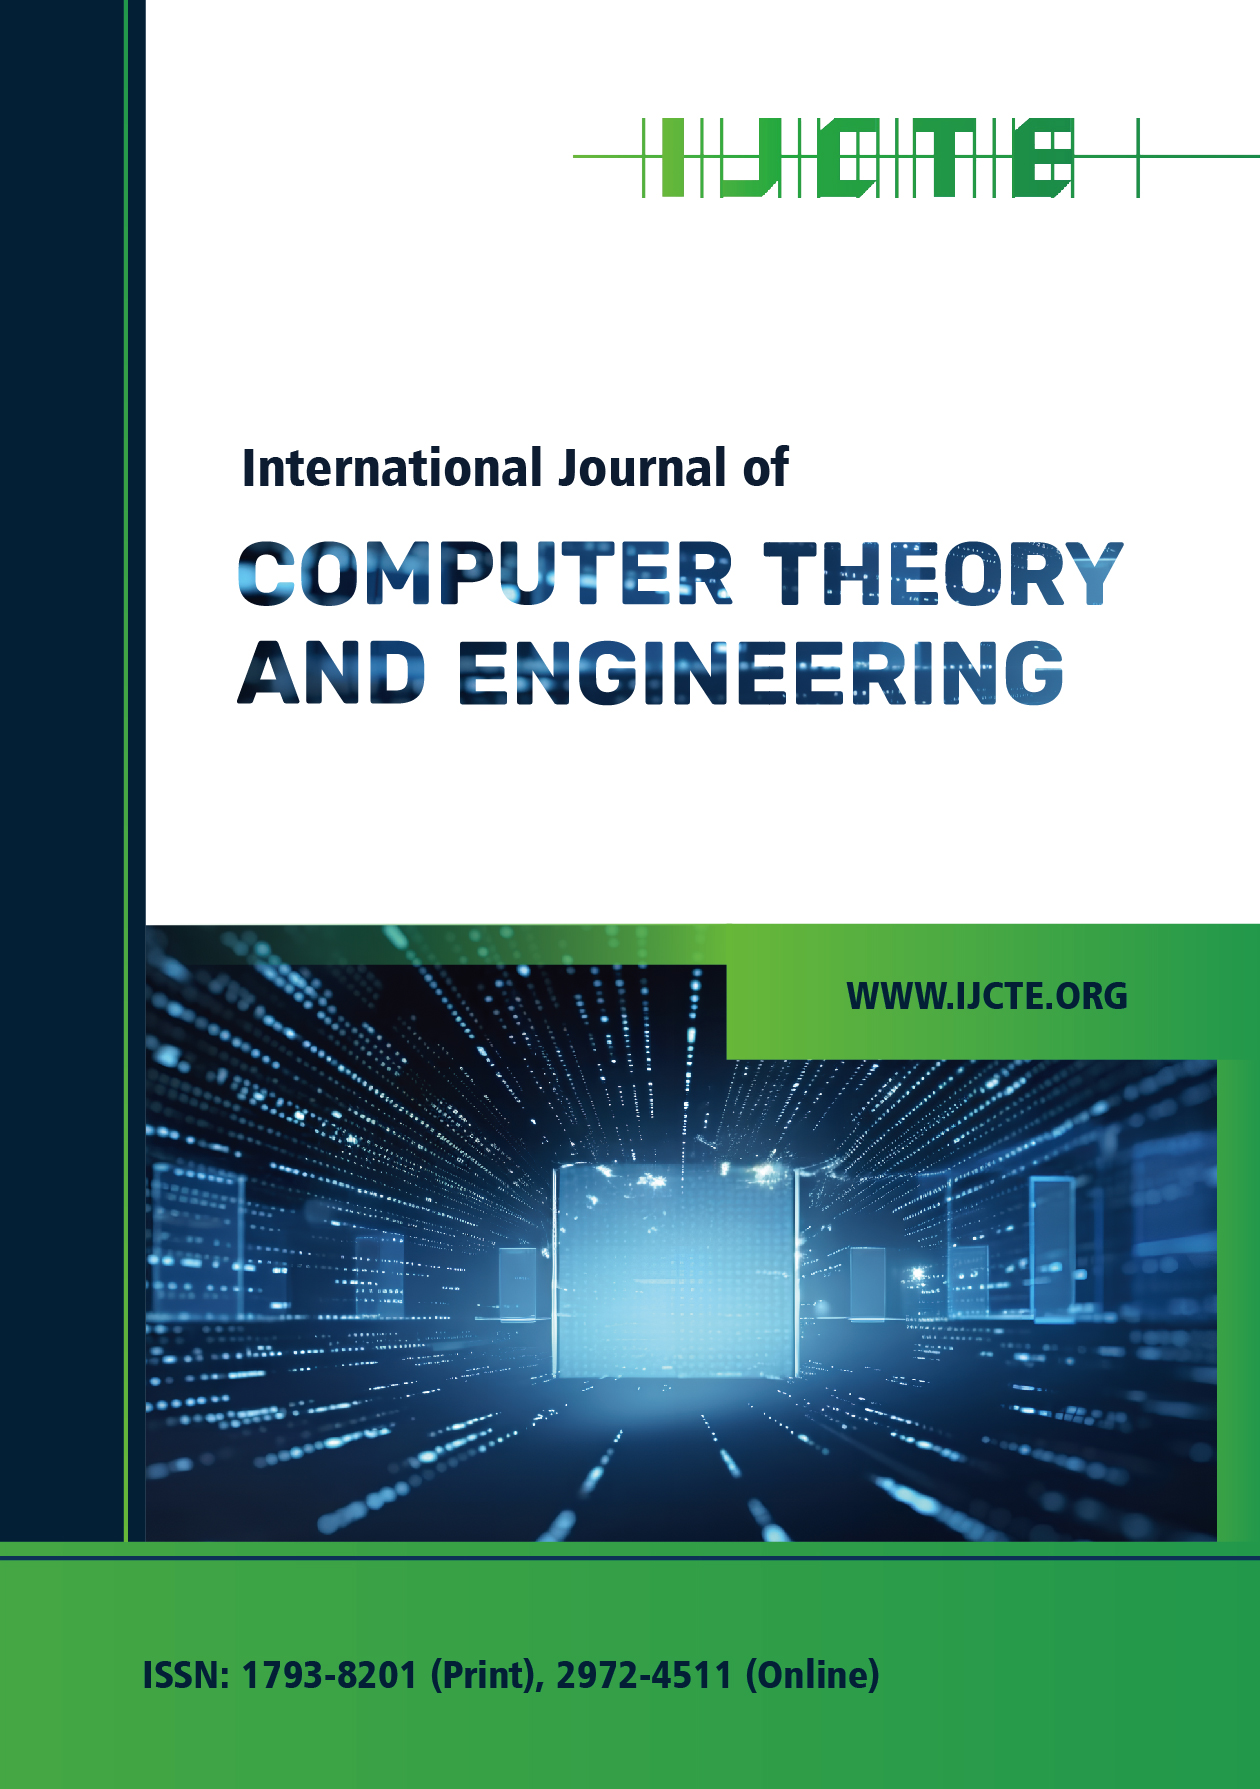 International Journal of Computer Theory and Engineering